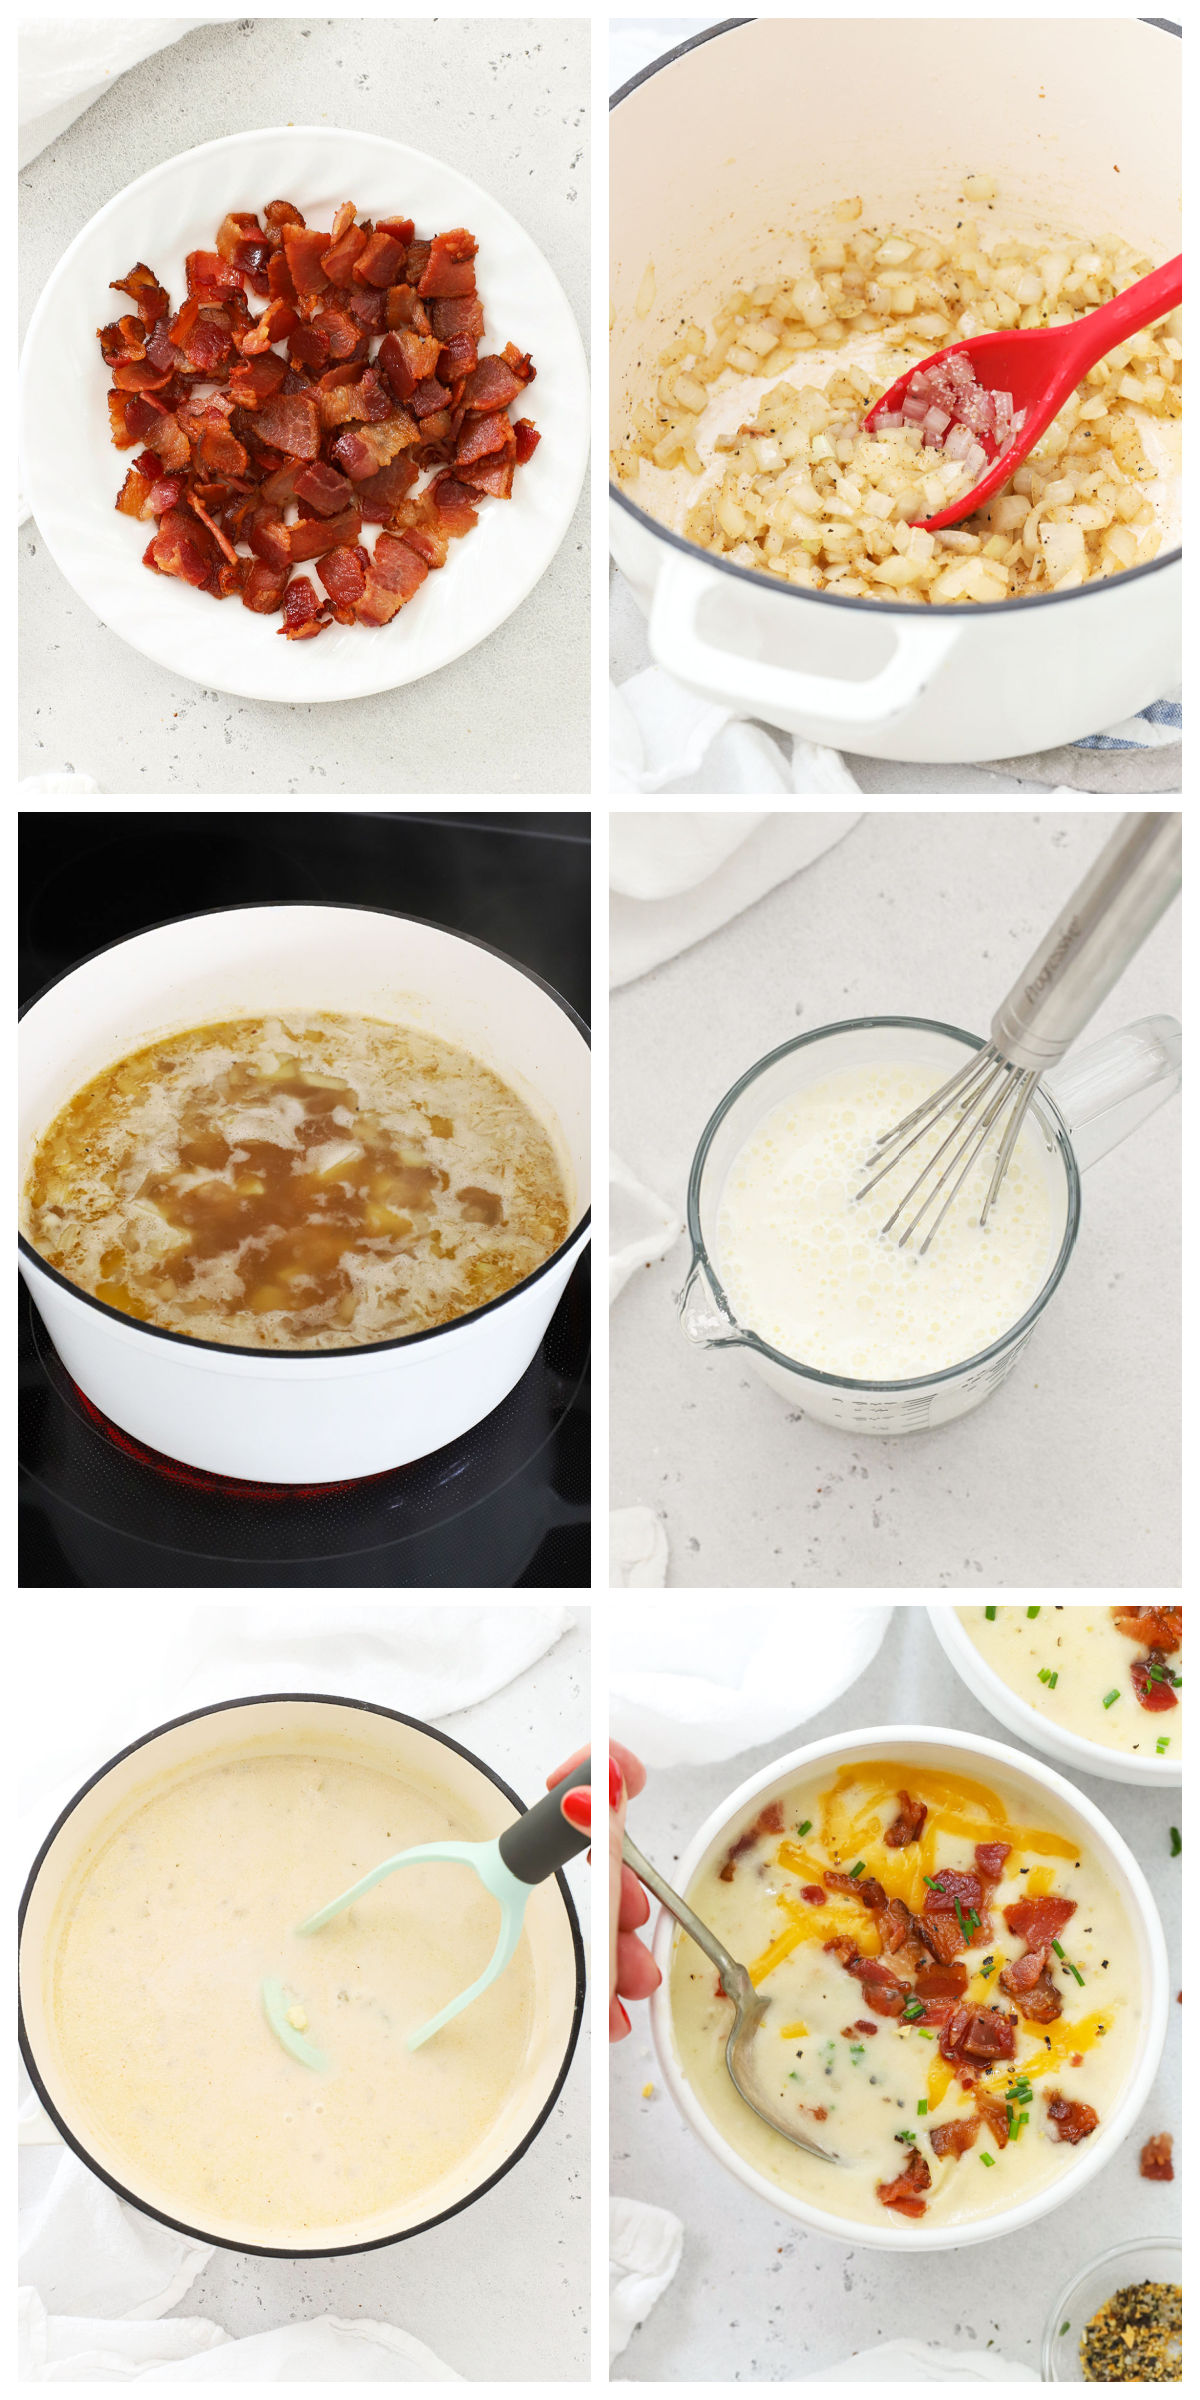 step by step instructions for making gluten-free potato soup